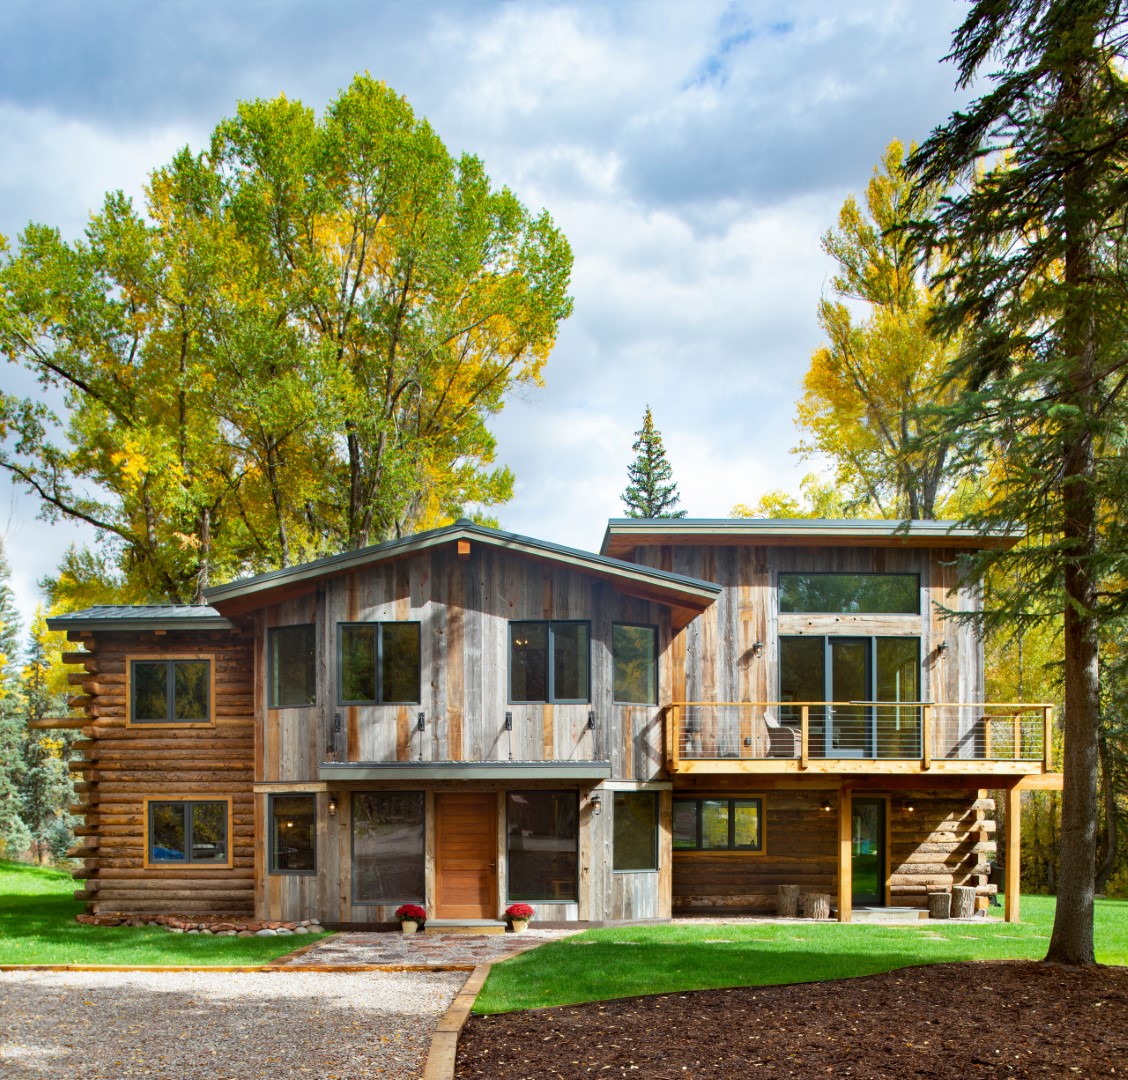 15 Phenomenal Rustic Home Exterior Designs You Will Dream About